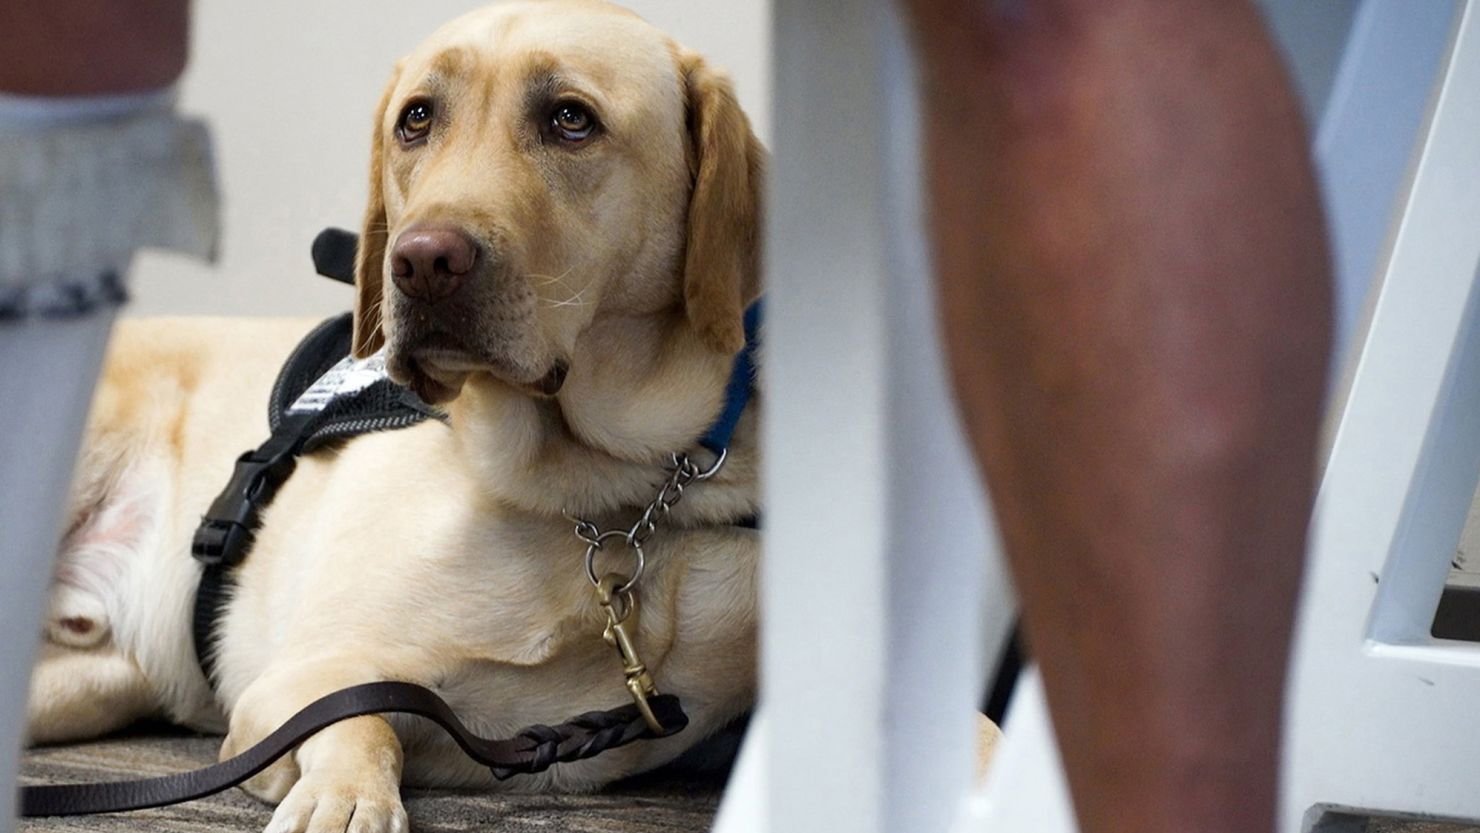 The concept of pets on planes has become a hot-button issue of late as emotional support animals have become more prominent than ever. (Shelly Yang/Kansas City Star/Tribune News Service via Getty Images)